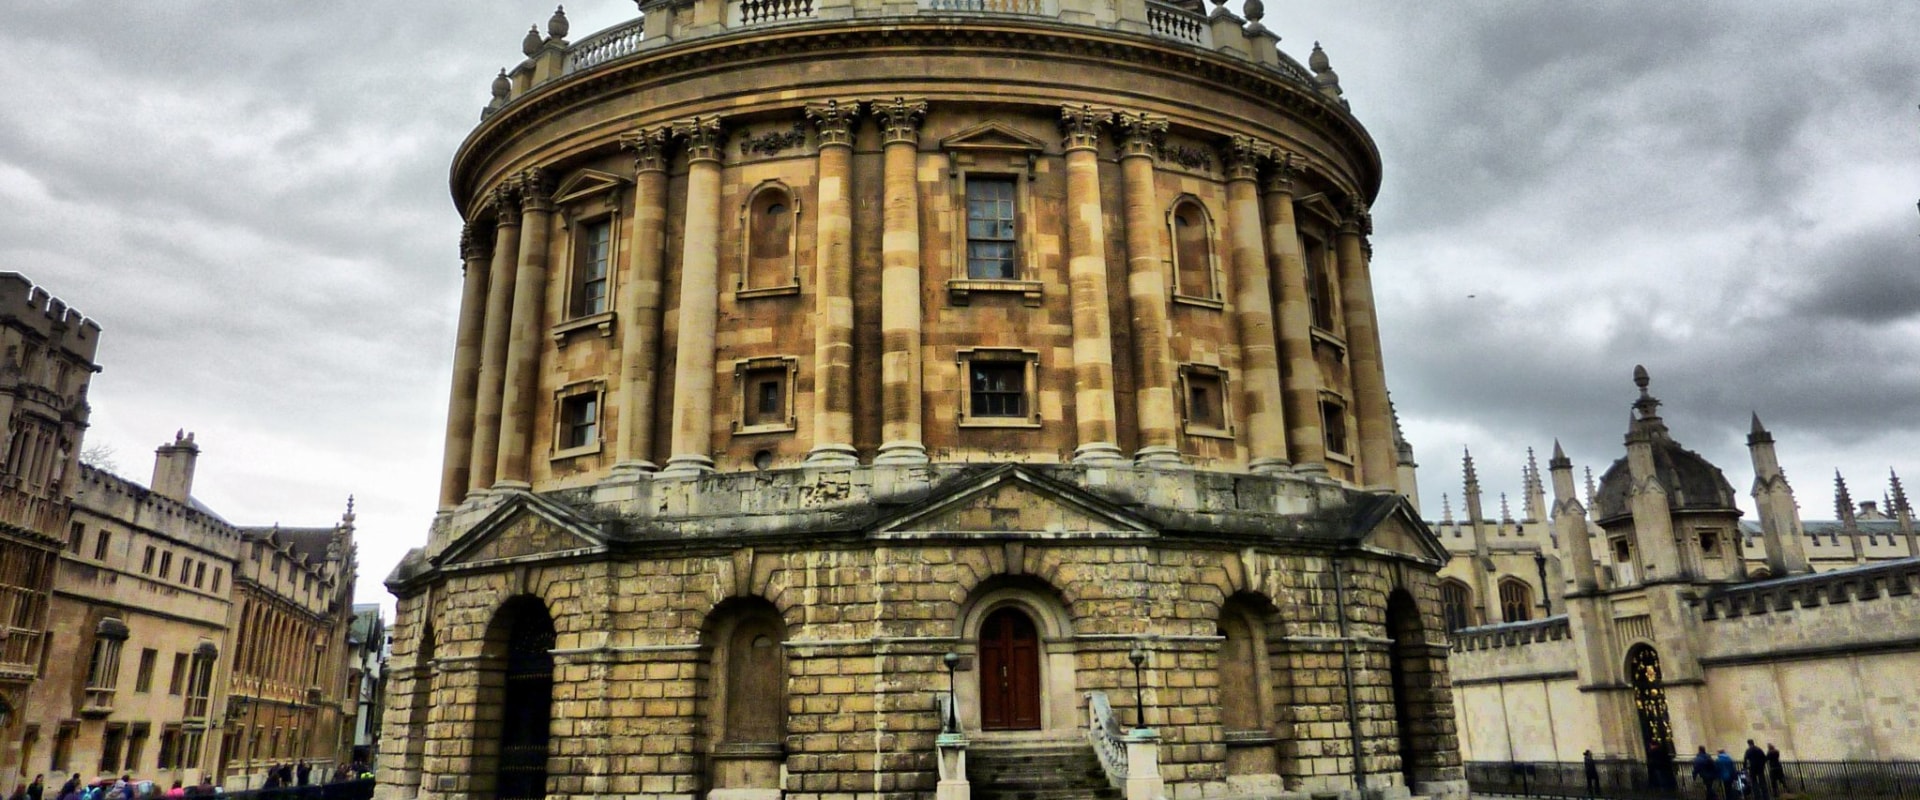 Exploring Jesus College: One of Oxford's Top 20 Colleges